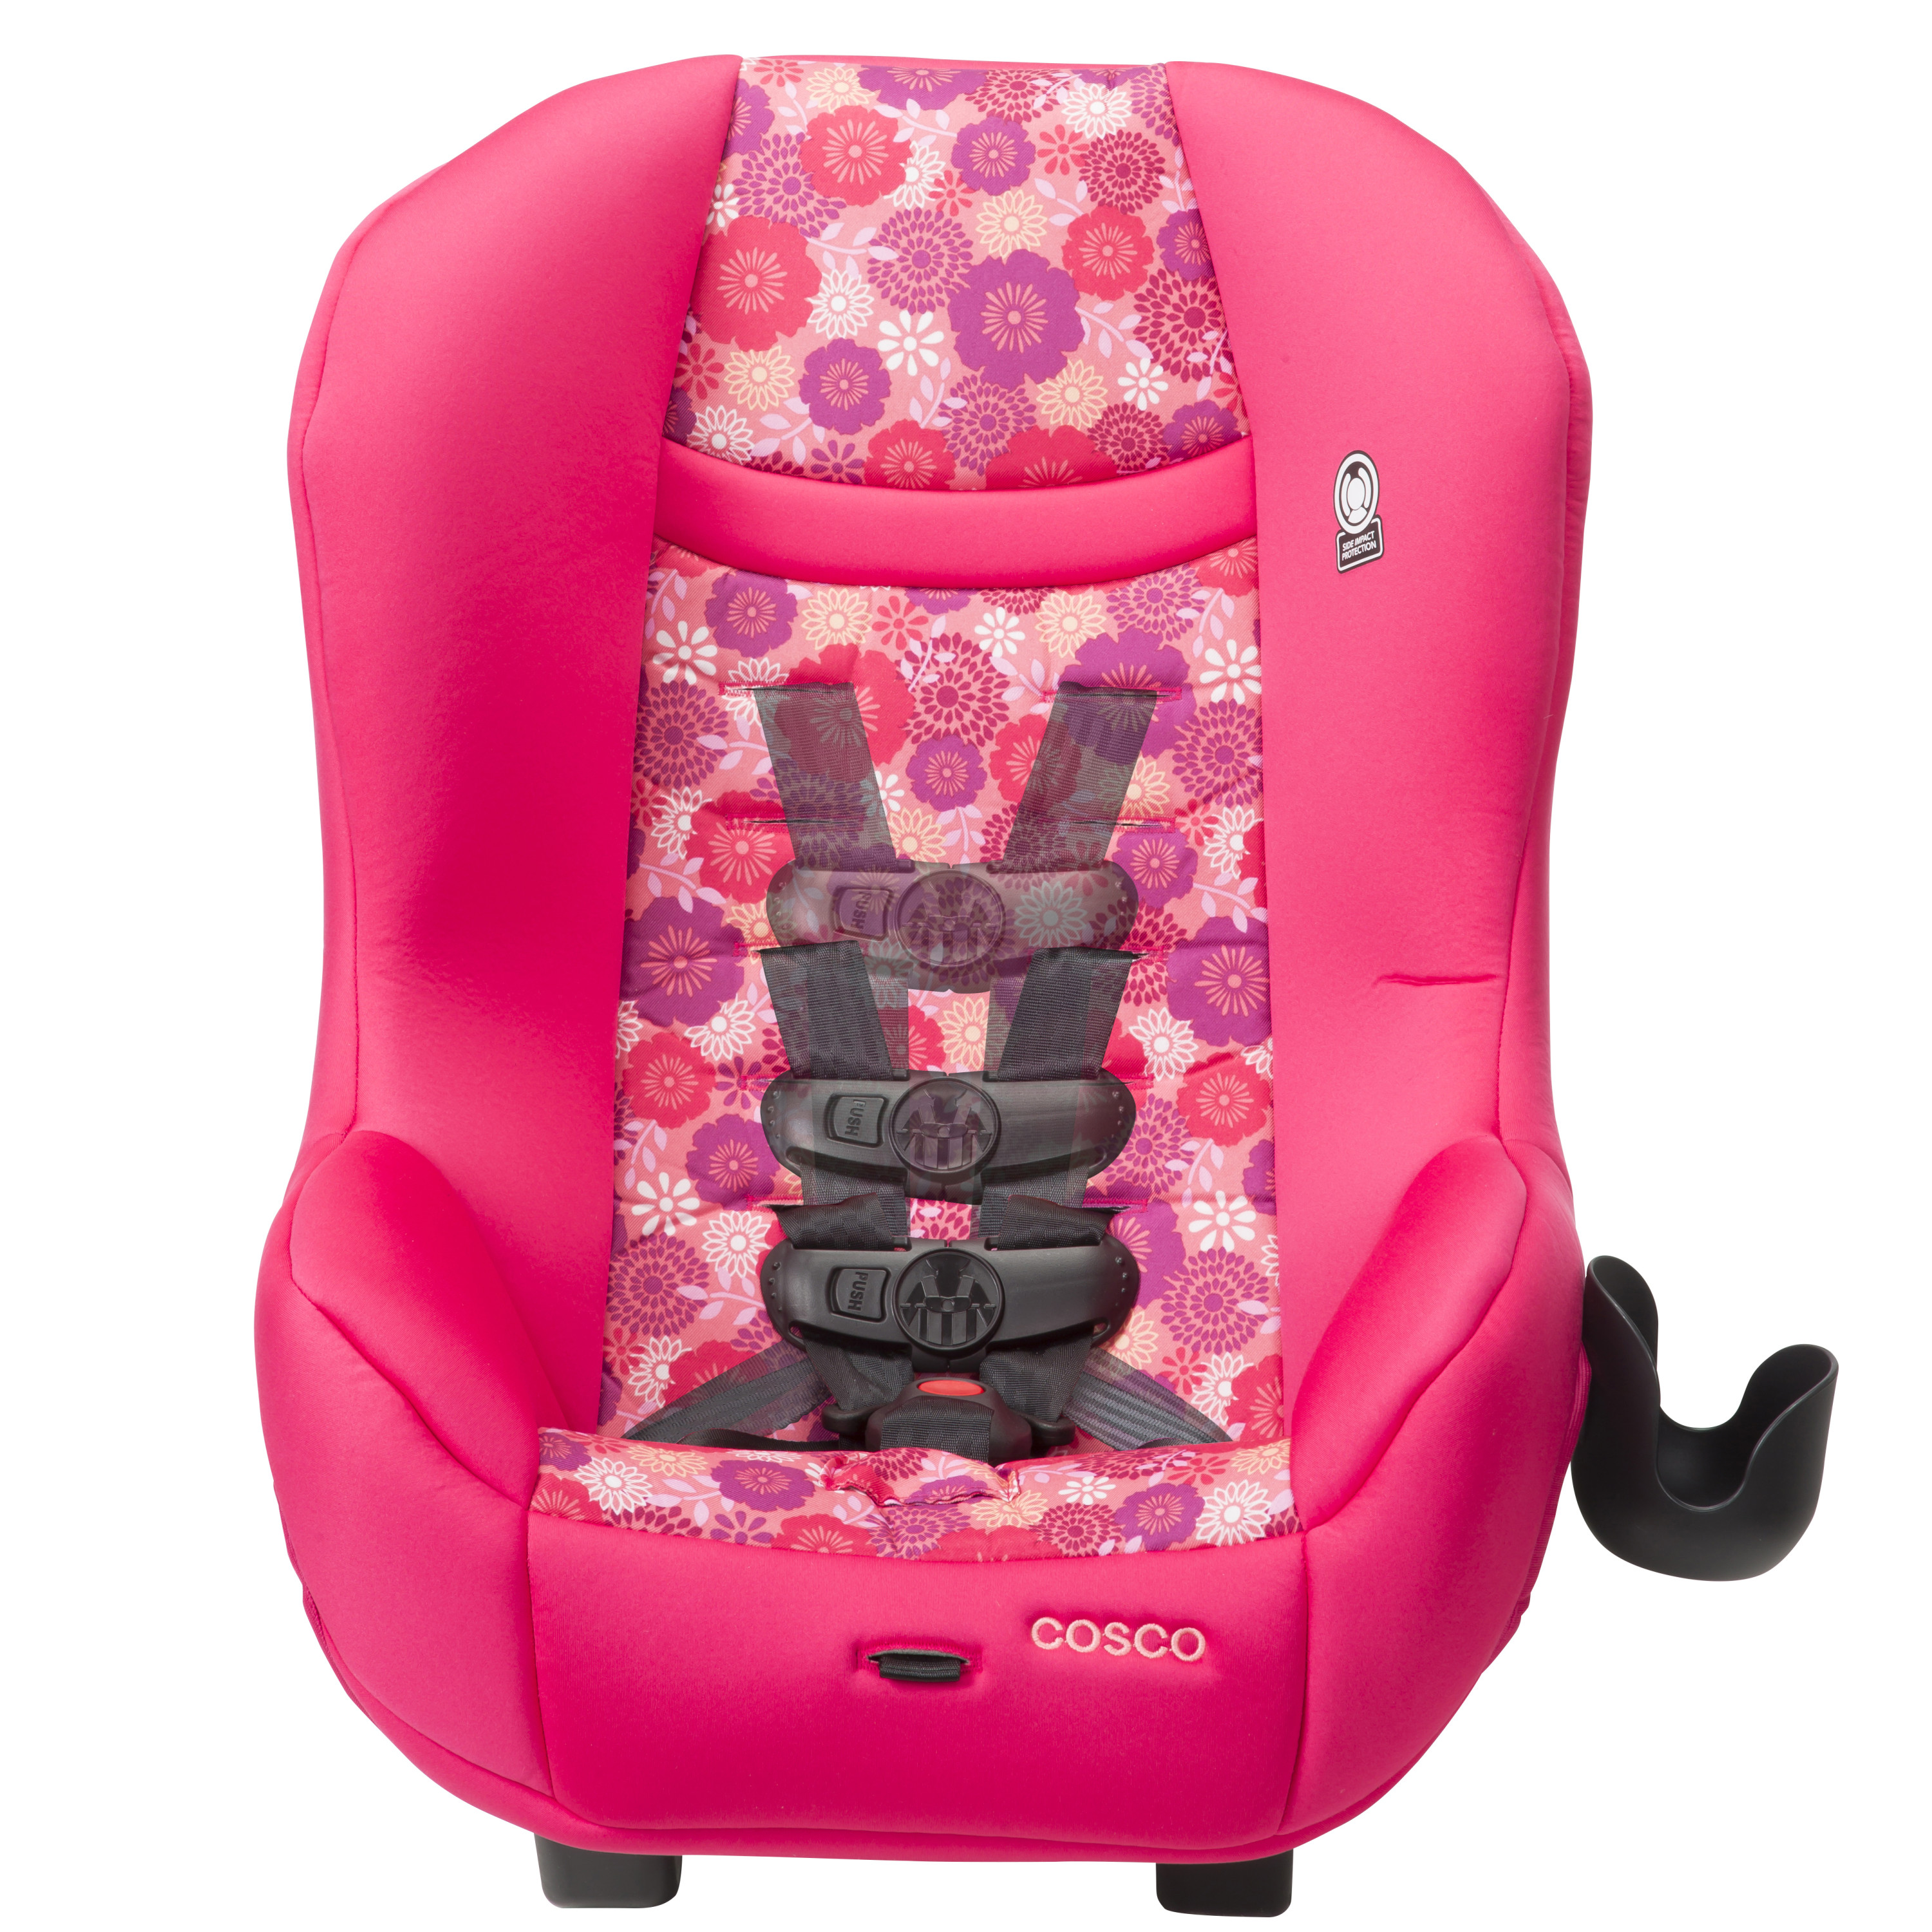 Cosco Scenera Convertible Car Seat, Floral Orchard Blossom Pink - image 9 of 13